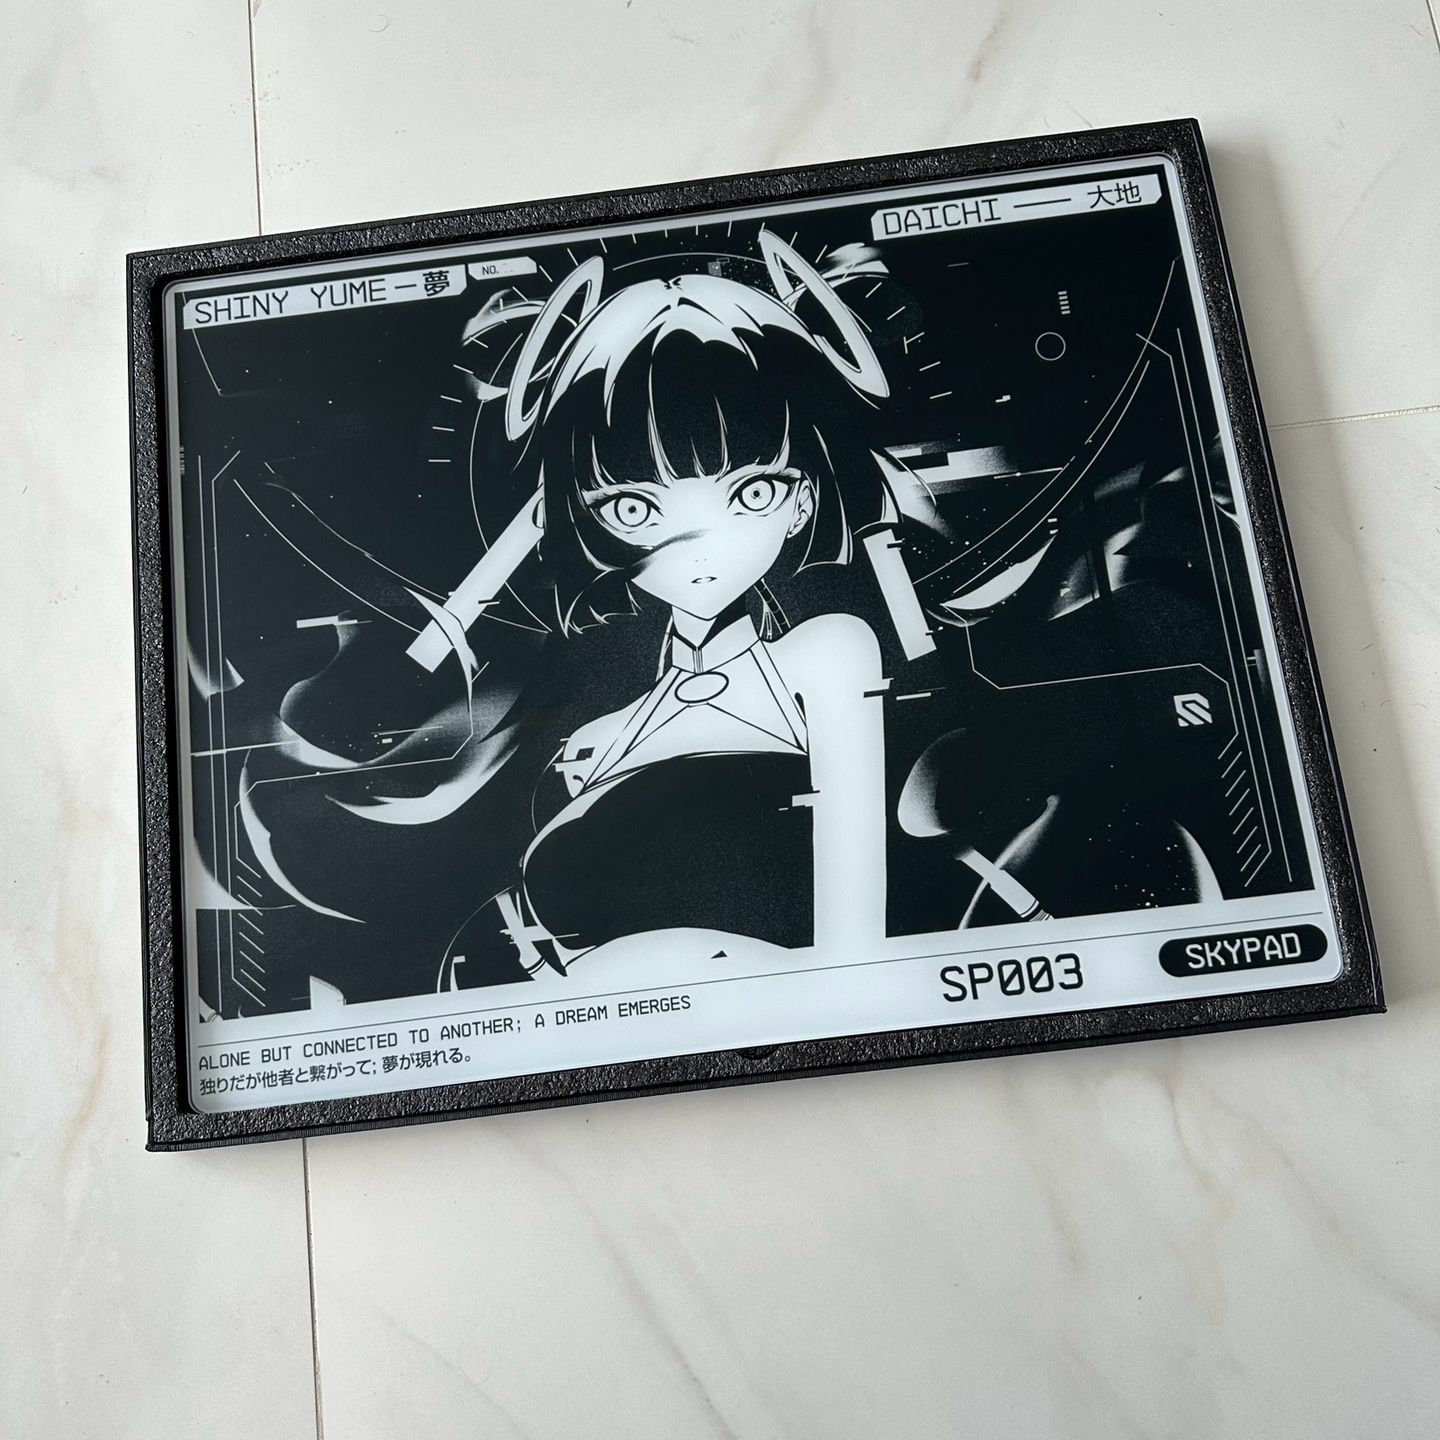 SkyPad Mousepad 3.0 XL Shiny Yume *In Hand* for Sale in Secaucus, NJ -  OfferUp